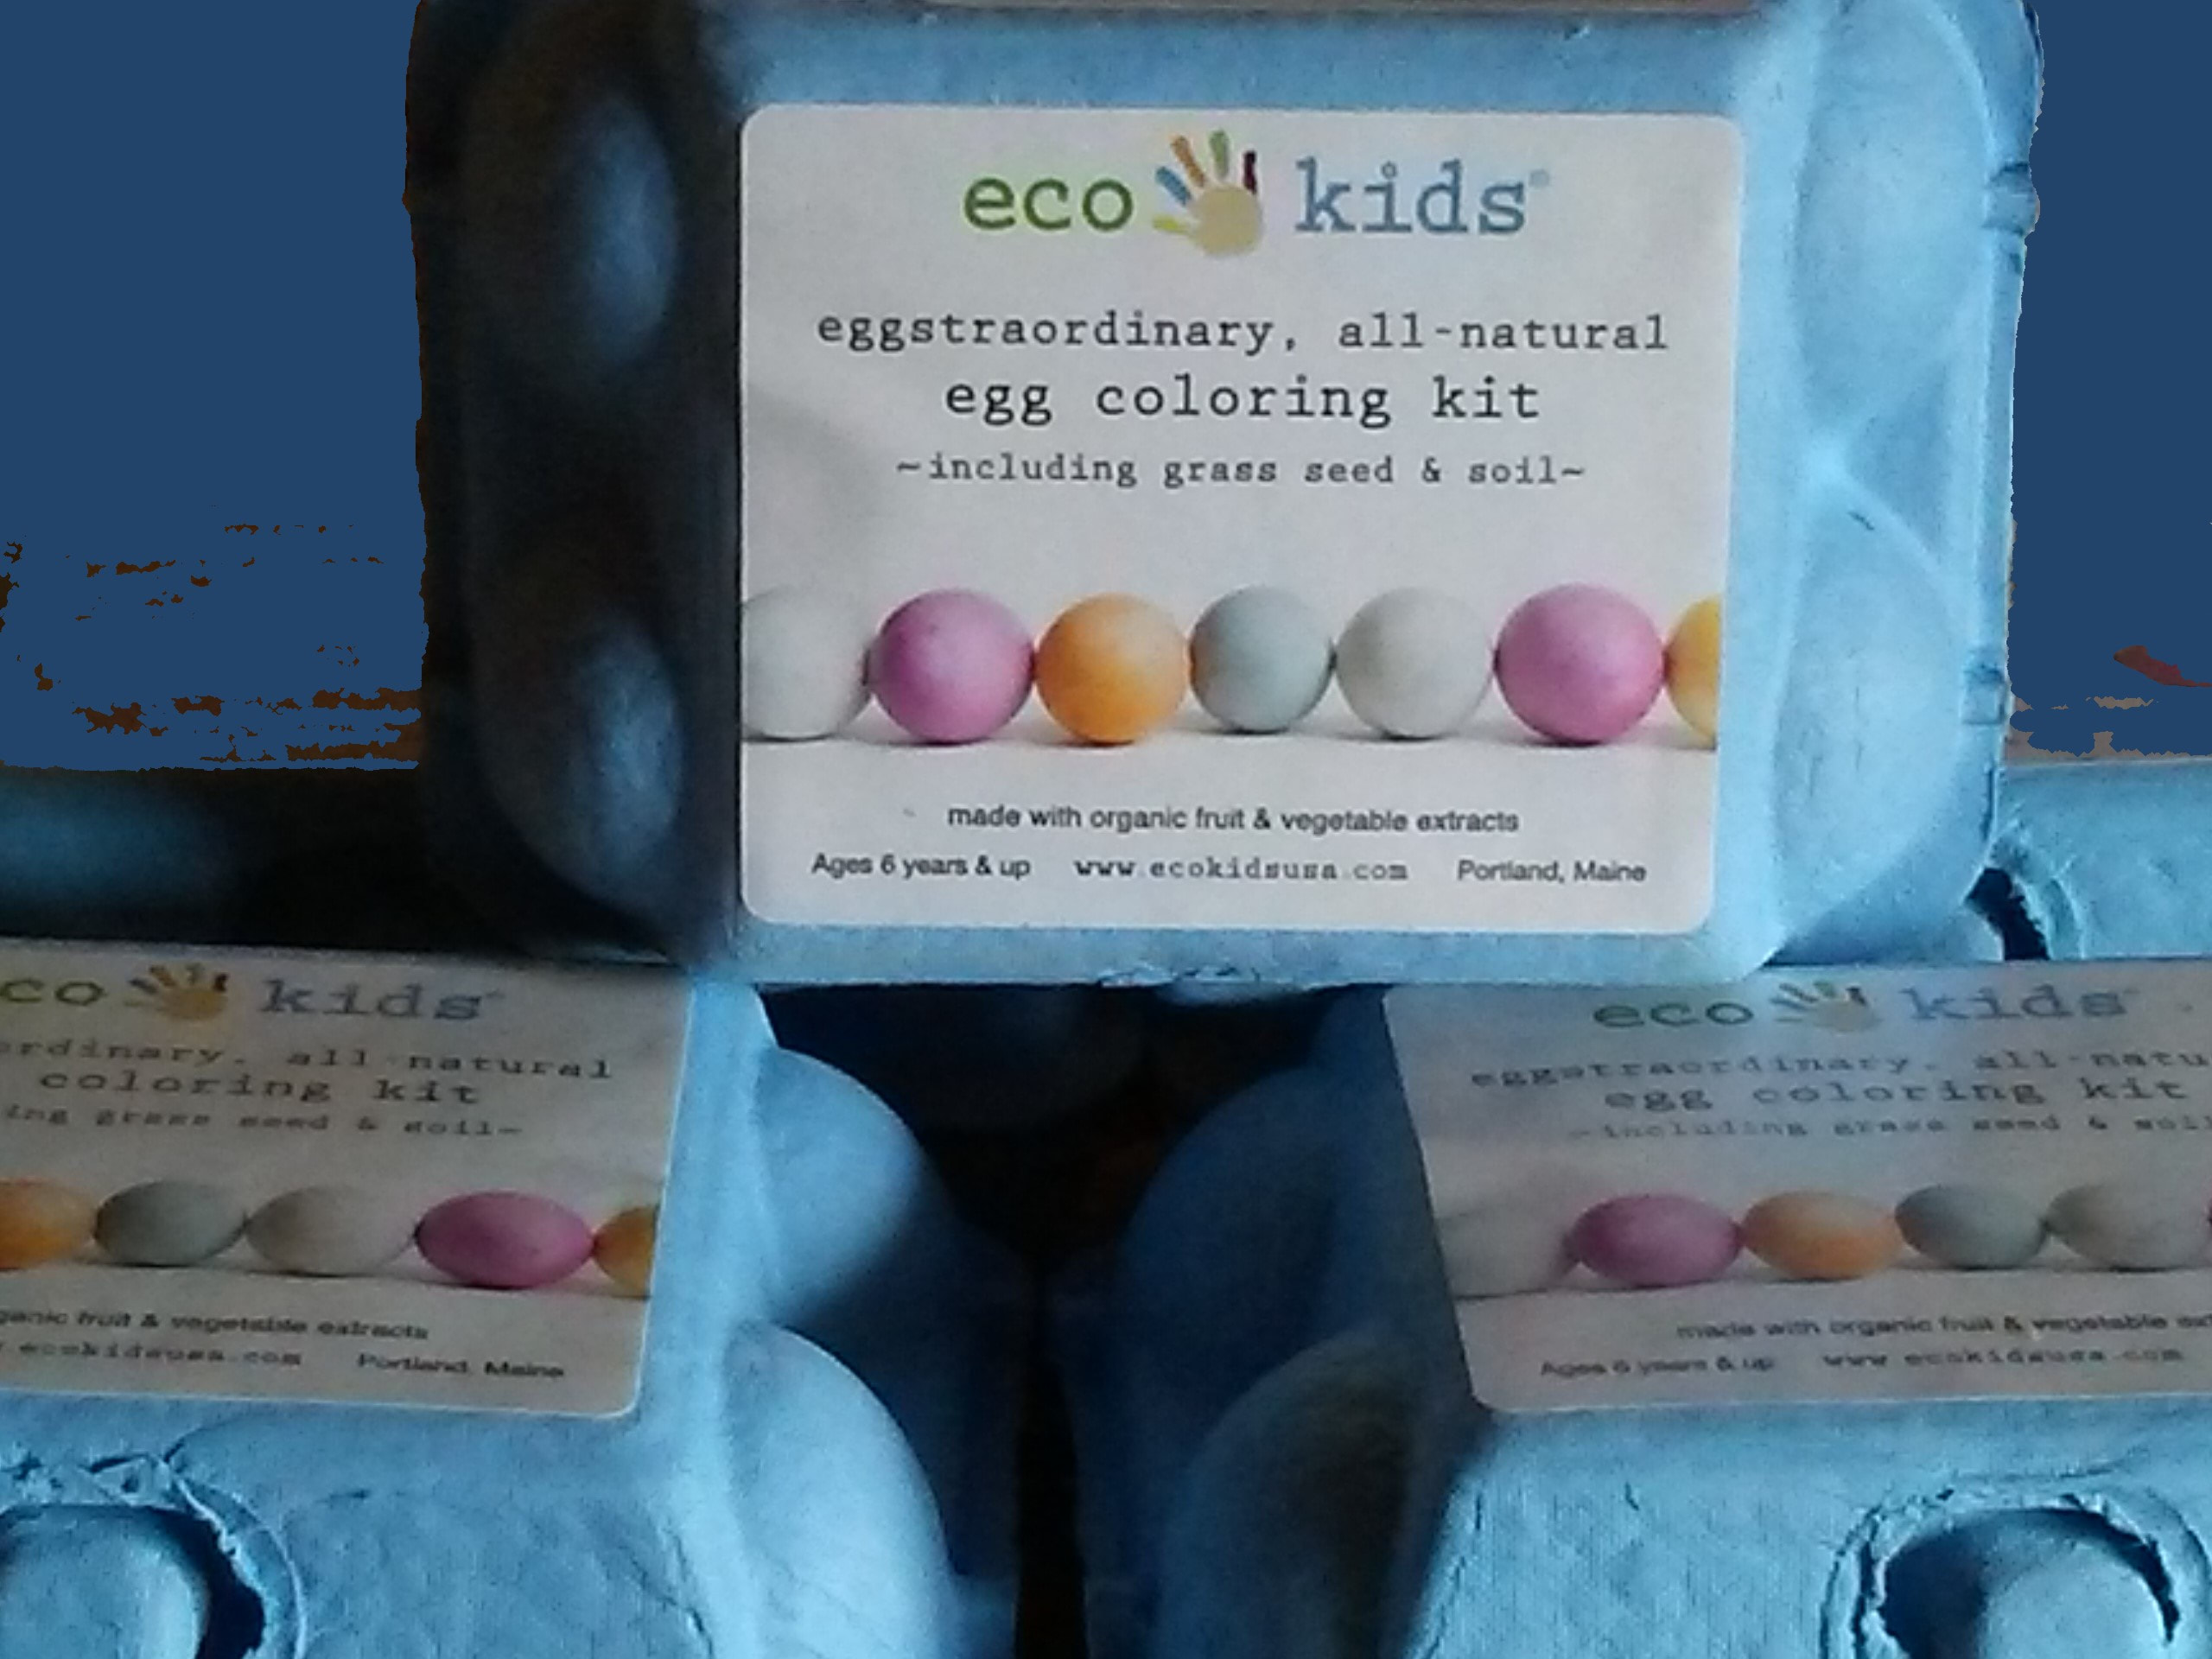 Eco-Eggs Coloring & Grass Growing Kit - blue Eco Kids